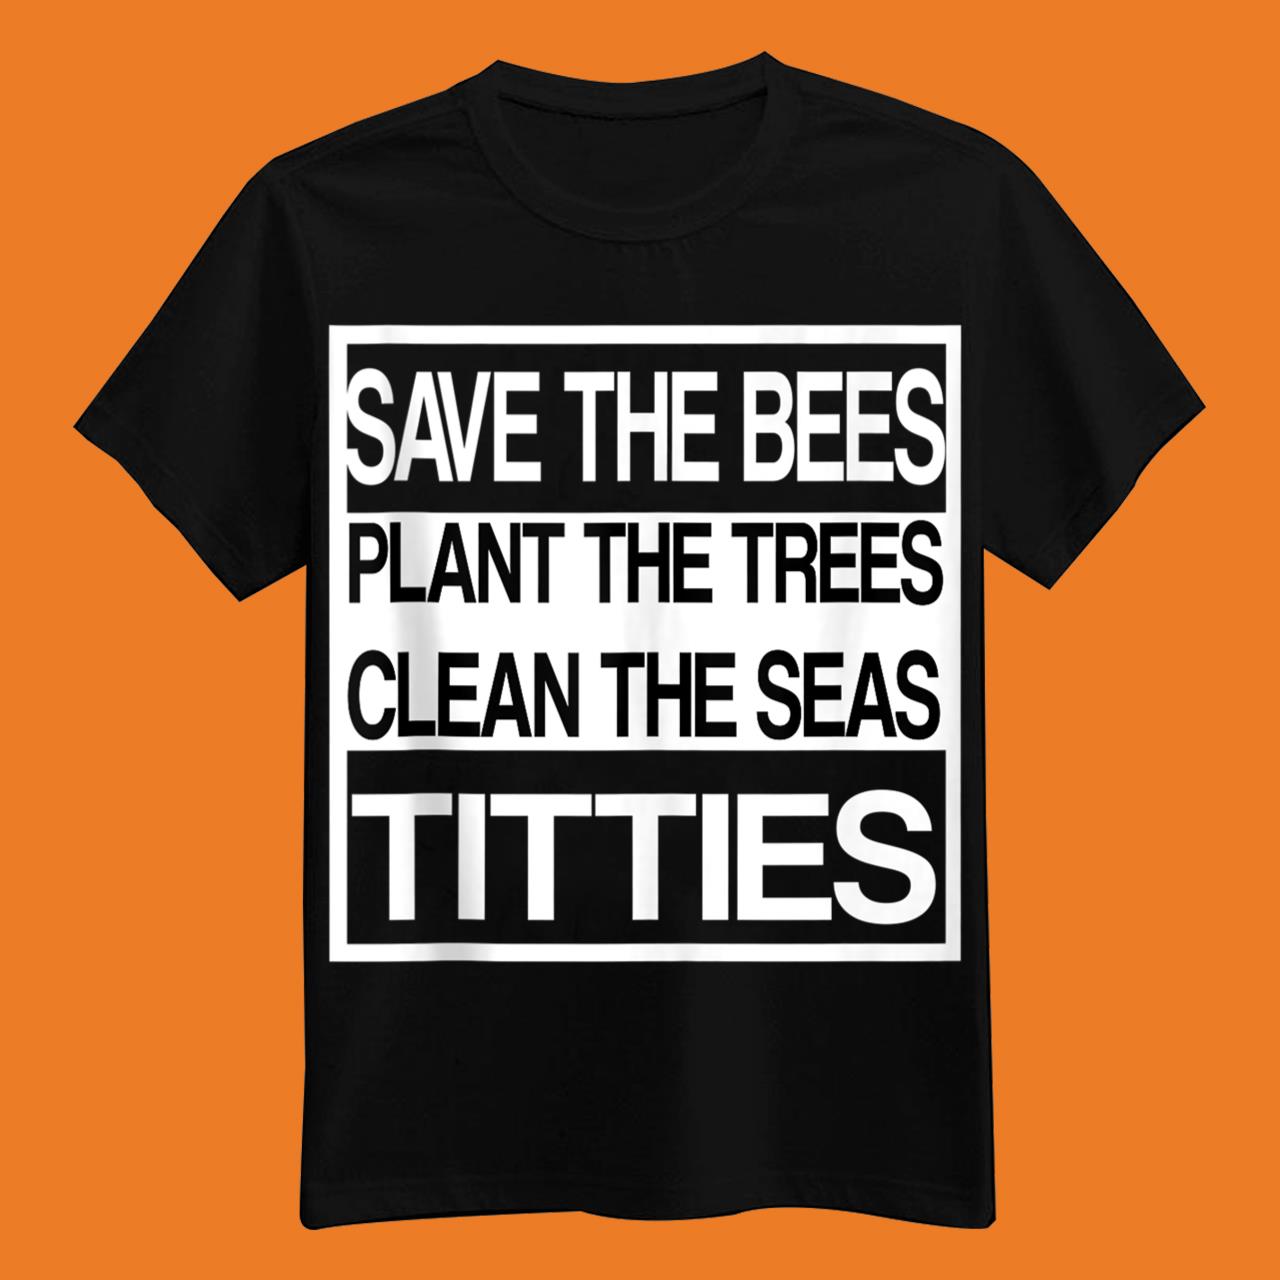 Save The Bees Plant More Trees Clean The Seas Titties Poetry Shirt